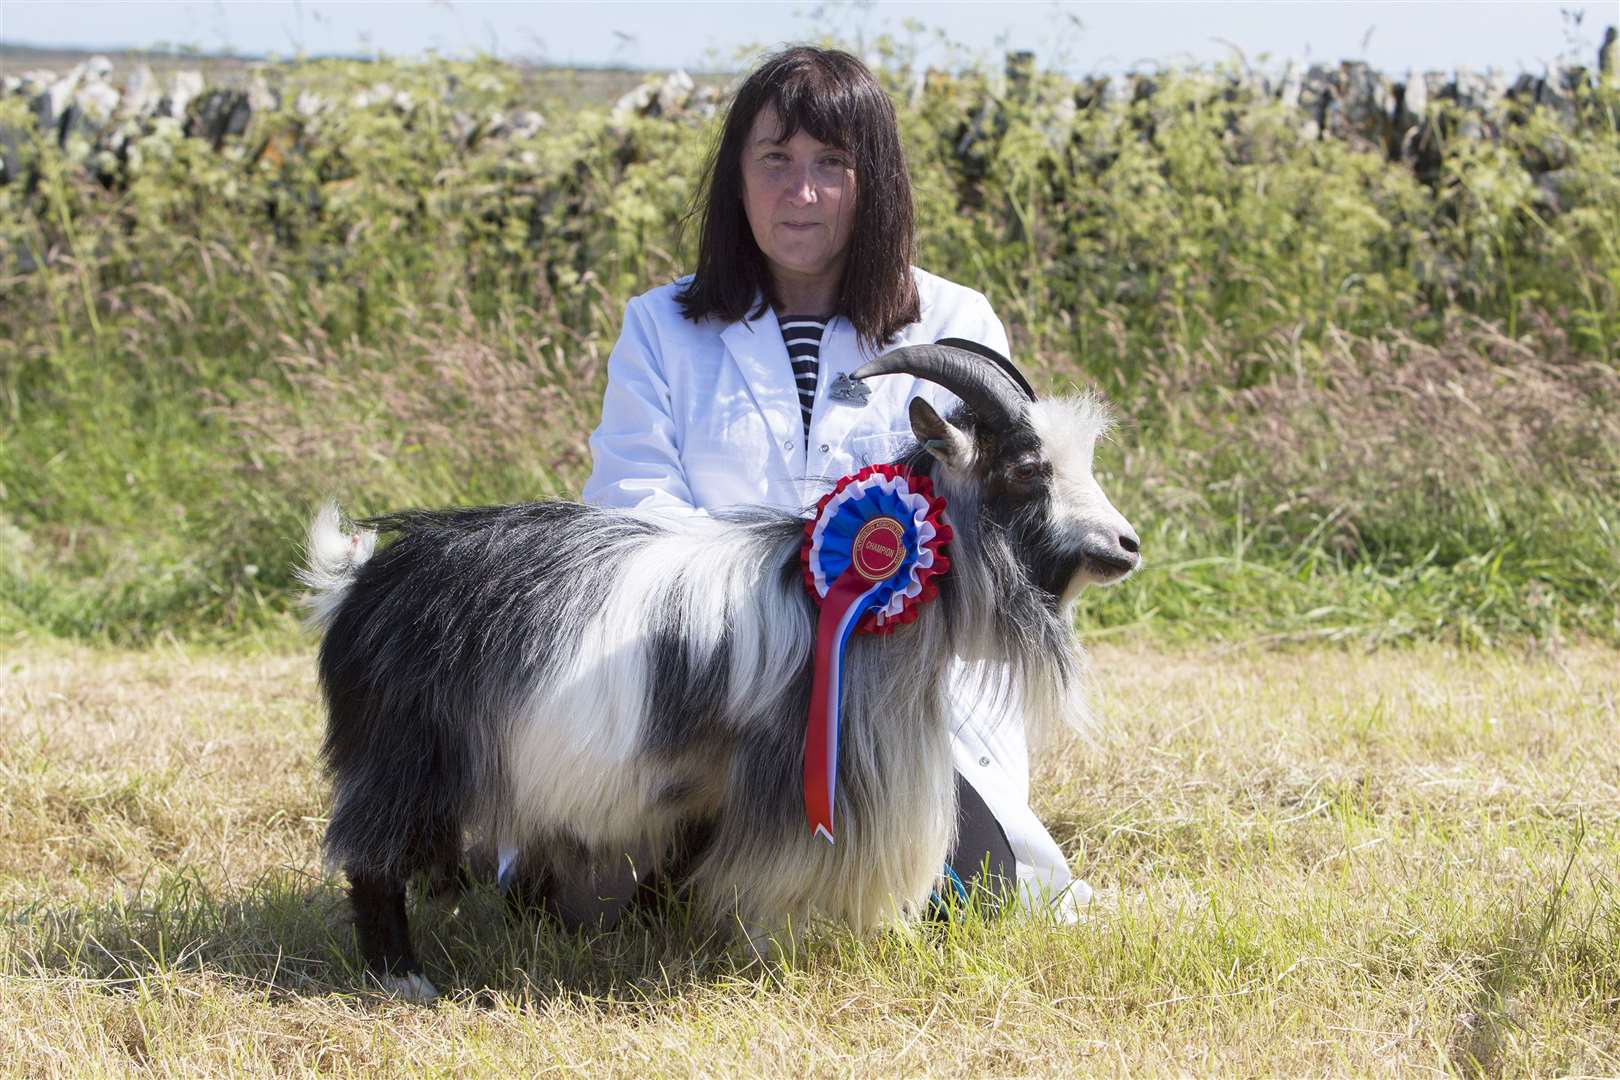 Robbianne Harrold, Roadside, Reiss, won the goat championship with her five-year-old pygmy billy goat, Moorview Snapdragon, which she bought as a kid. Picture: Robert MacDonald / Northern Studios